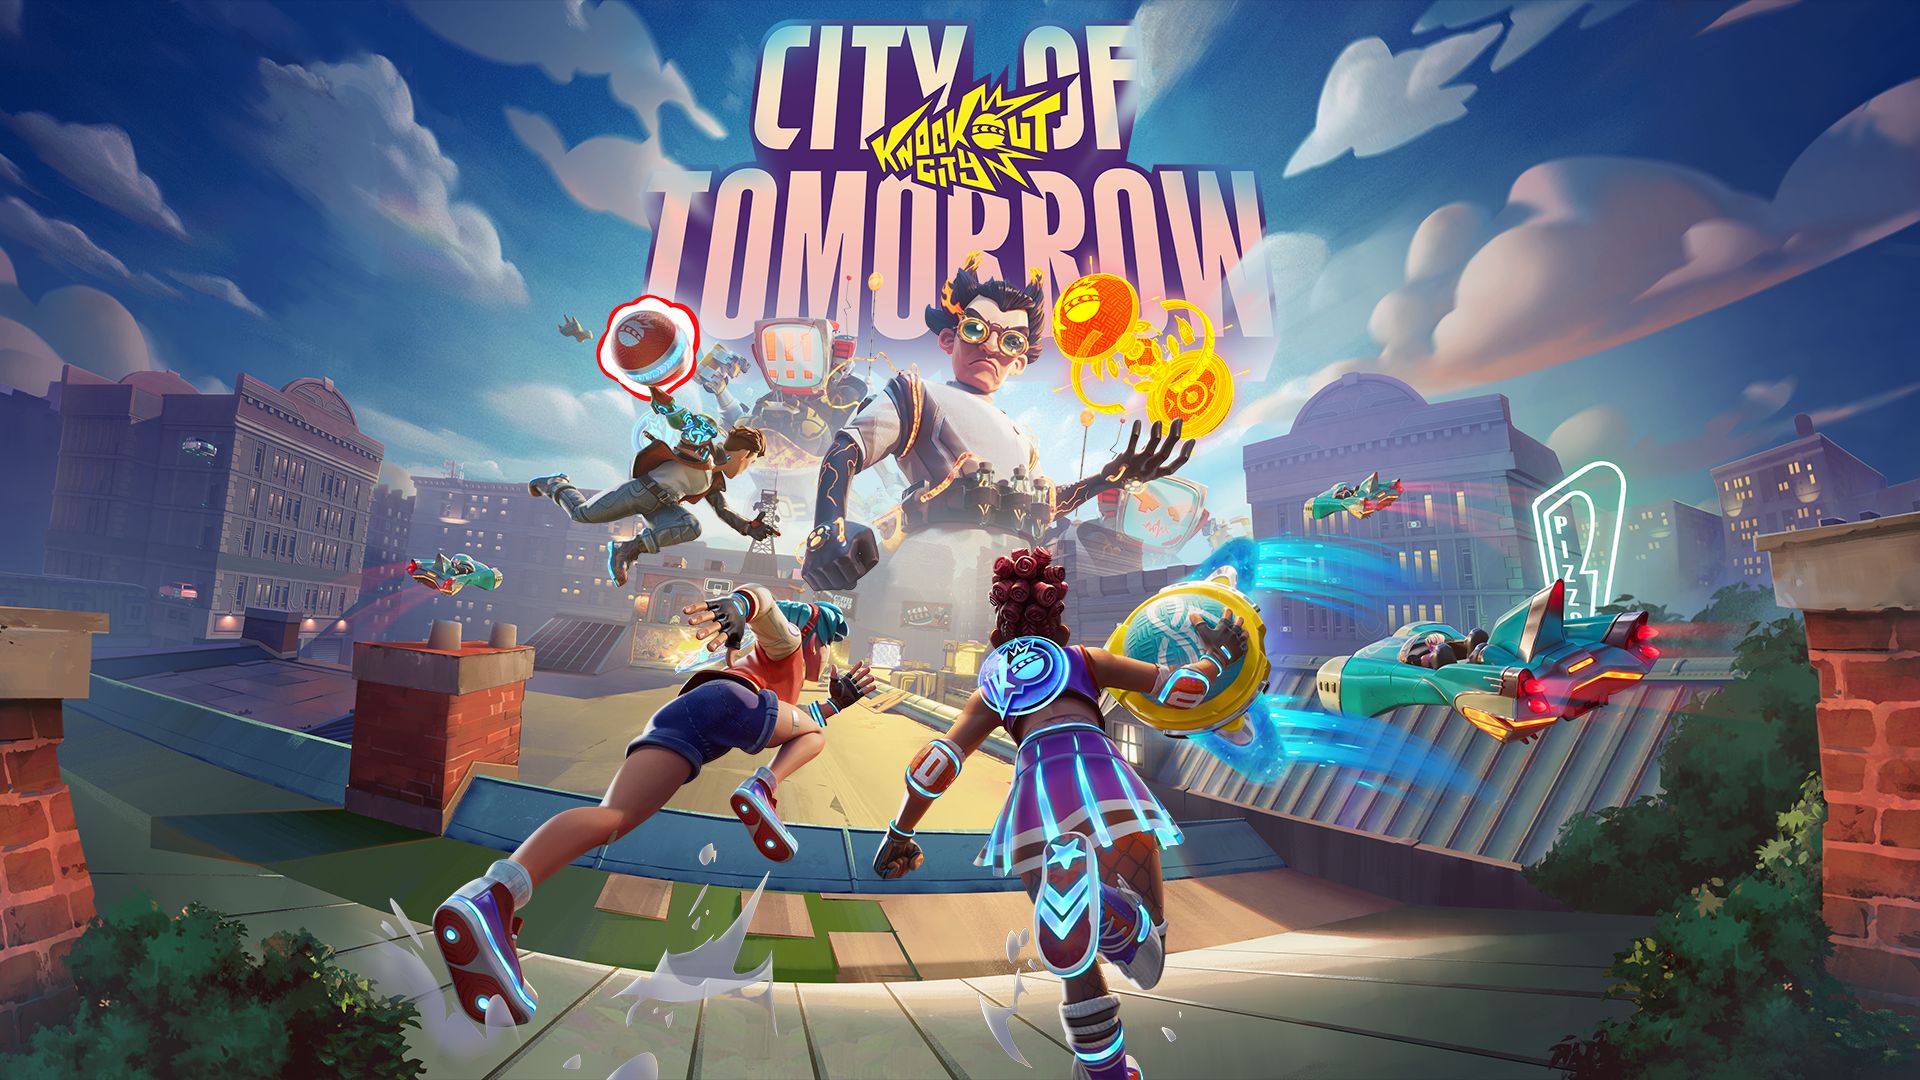 Welcome to the Future of Knockout City in Season 6: City of Tomorrow